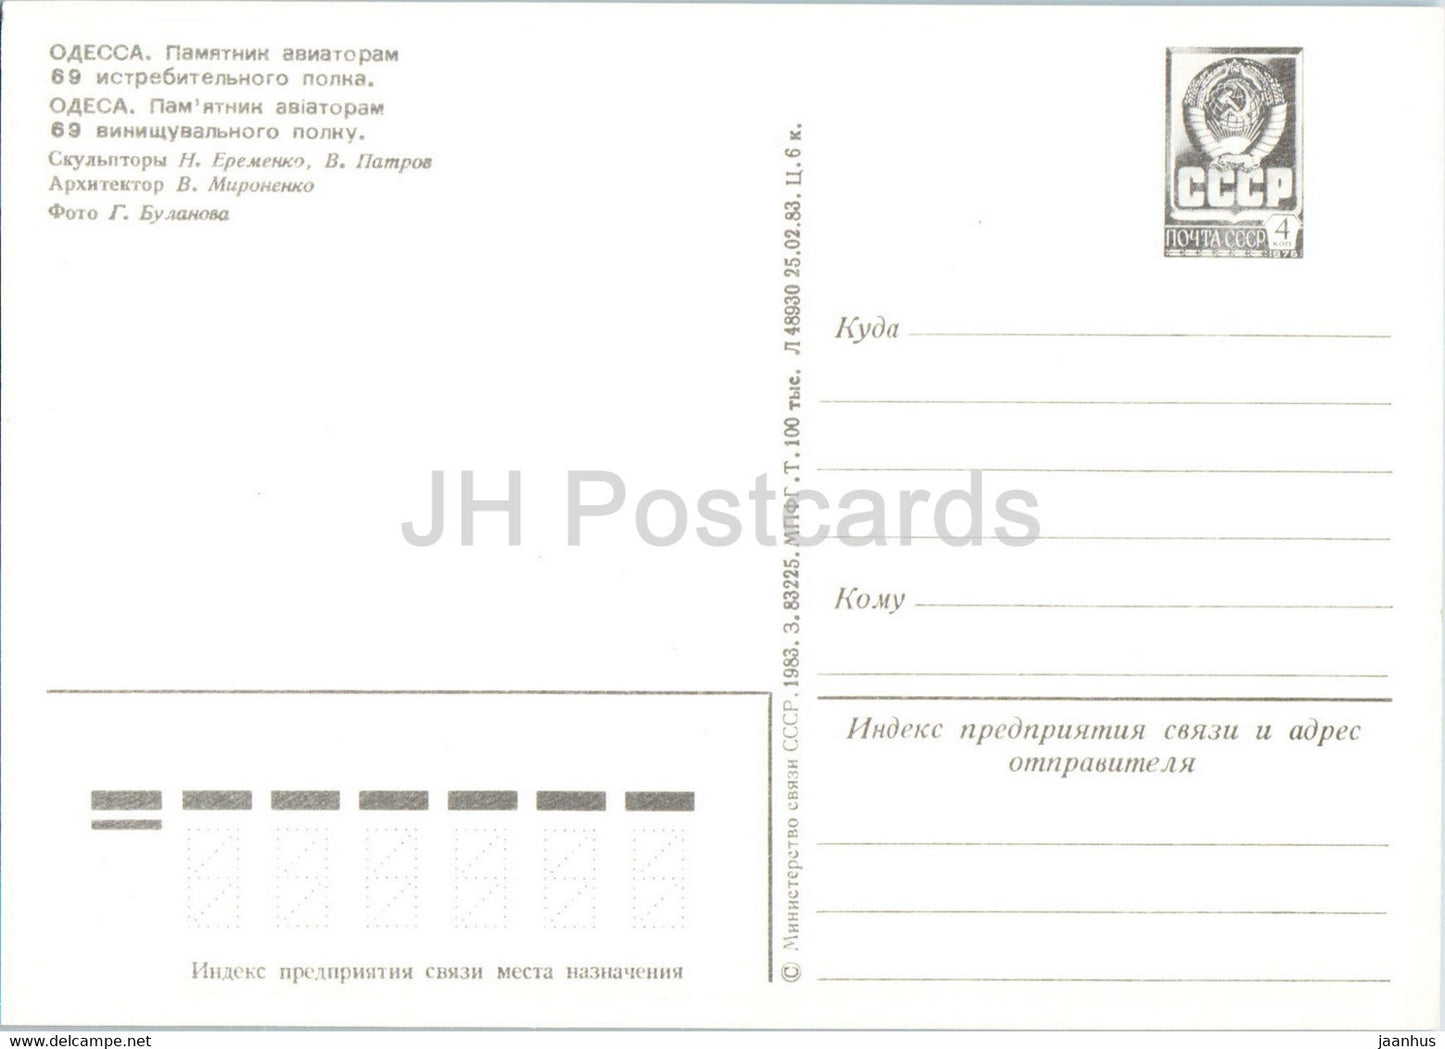 Odessa - Monument to the Aviators of the 69th Fighter Regiment - postal stationery - 1983 - Ukraine USSR - unused